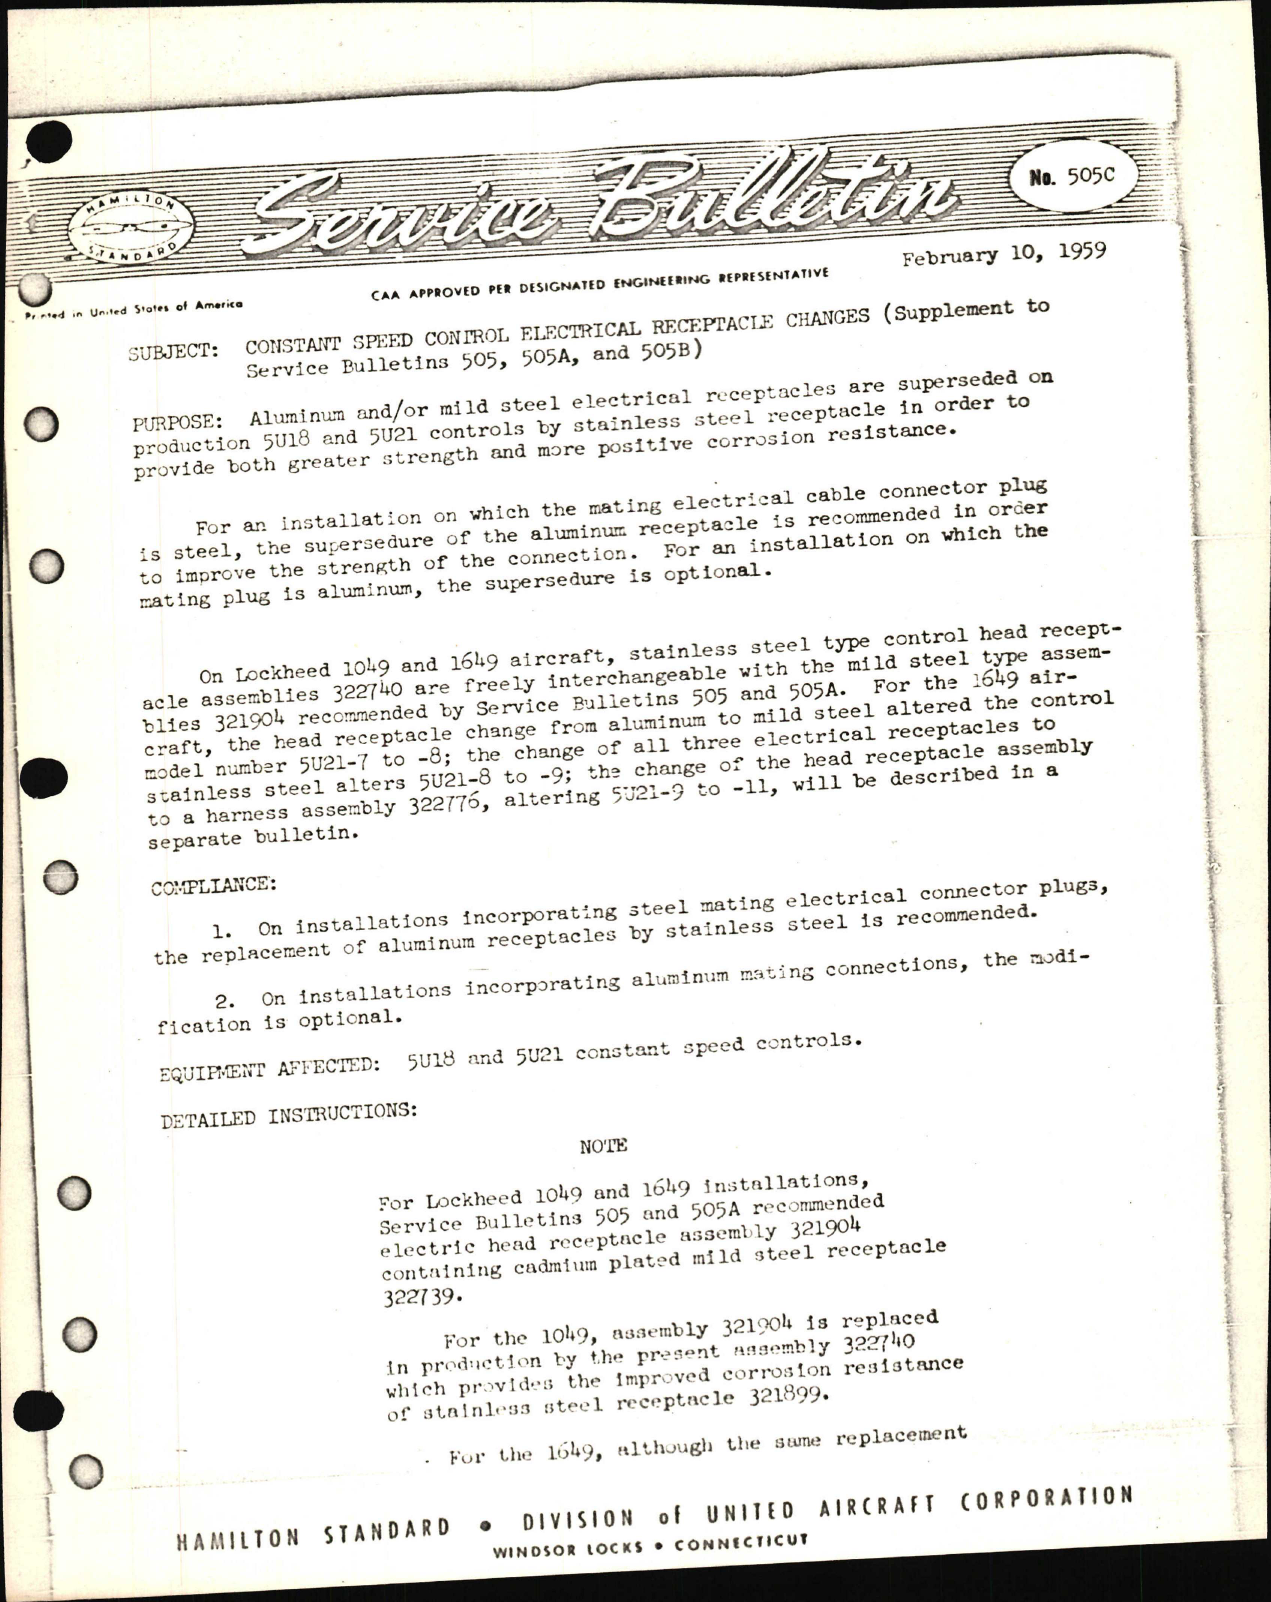 Sample page 1 from AirCorps Library document: Constant Speed Control Electric Head Receptacle Change